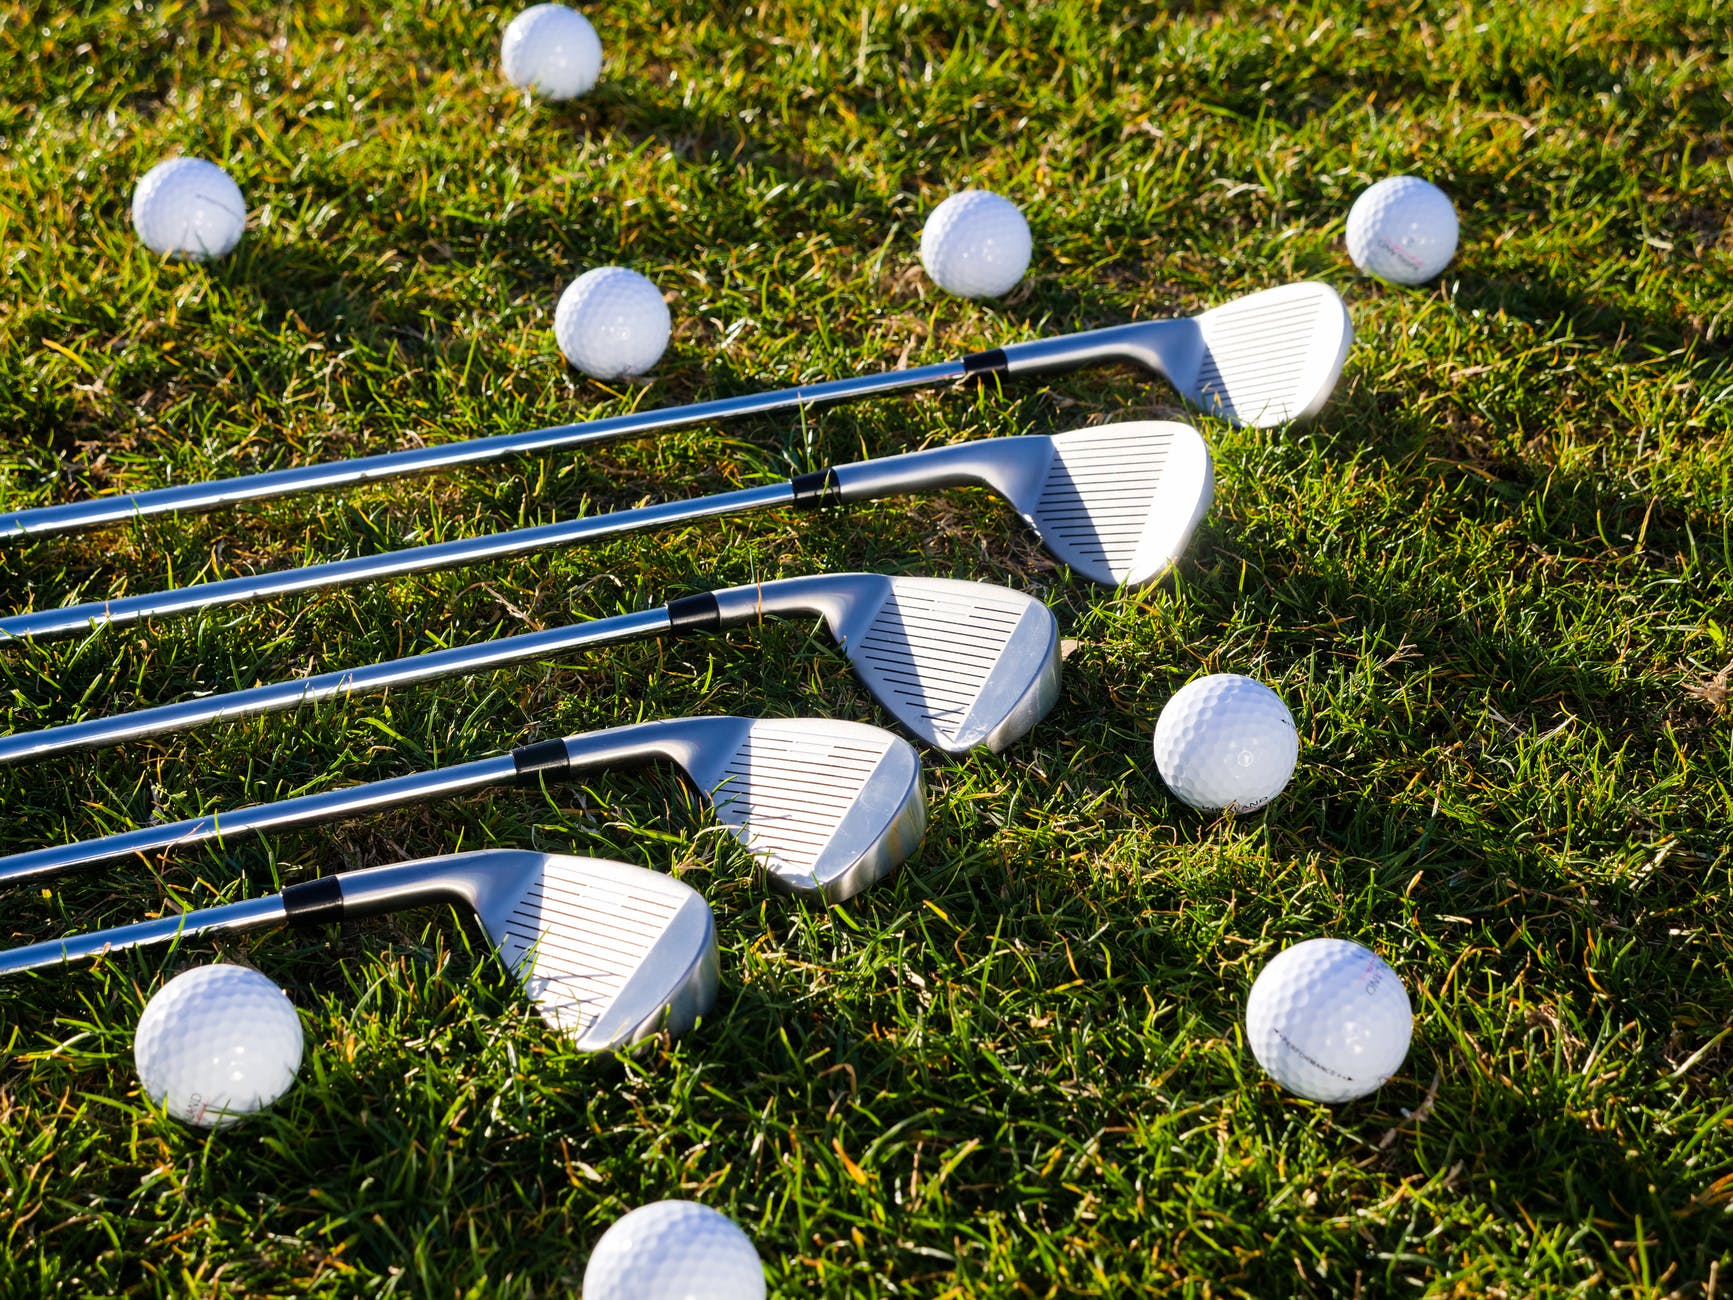 Sorted golf clubs and golf bal